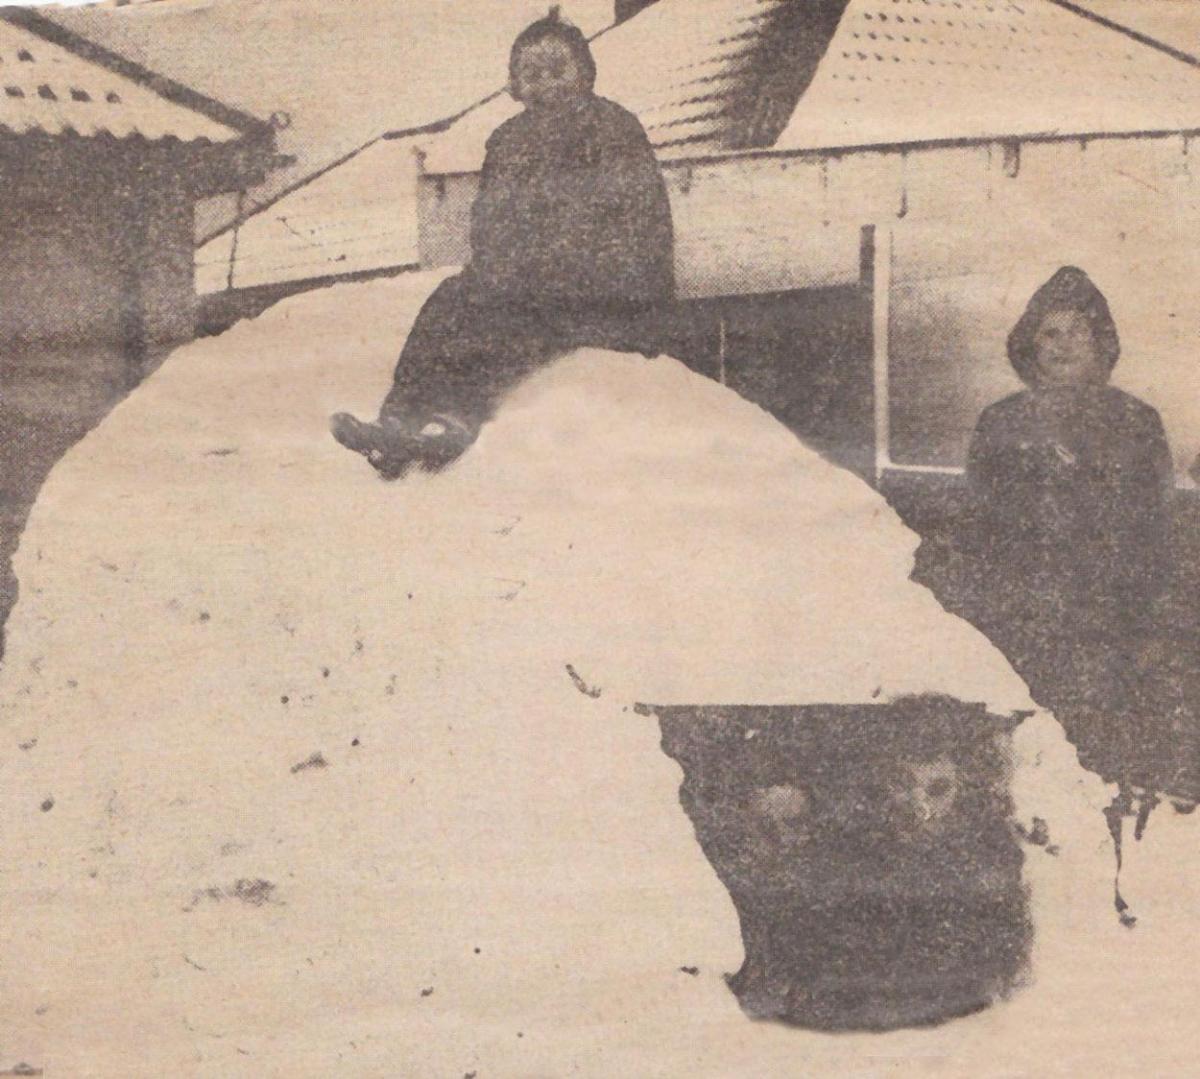 January 1963 these four children at Poole found the snowy weather ideal when they made an igloo in their garden which held six comfortably. With an electric torch for illumination, it was a marvellous place to play during the severe winter.